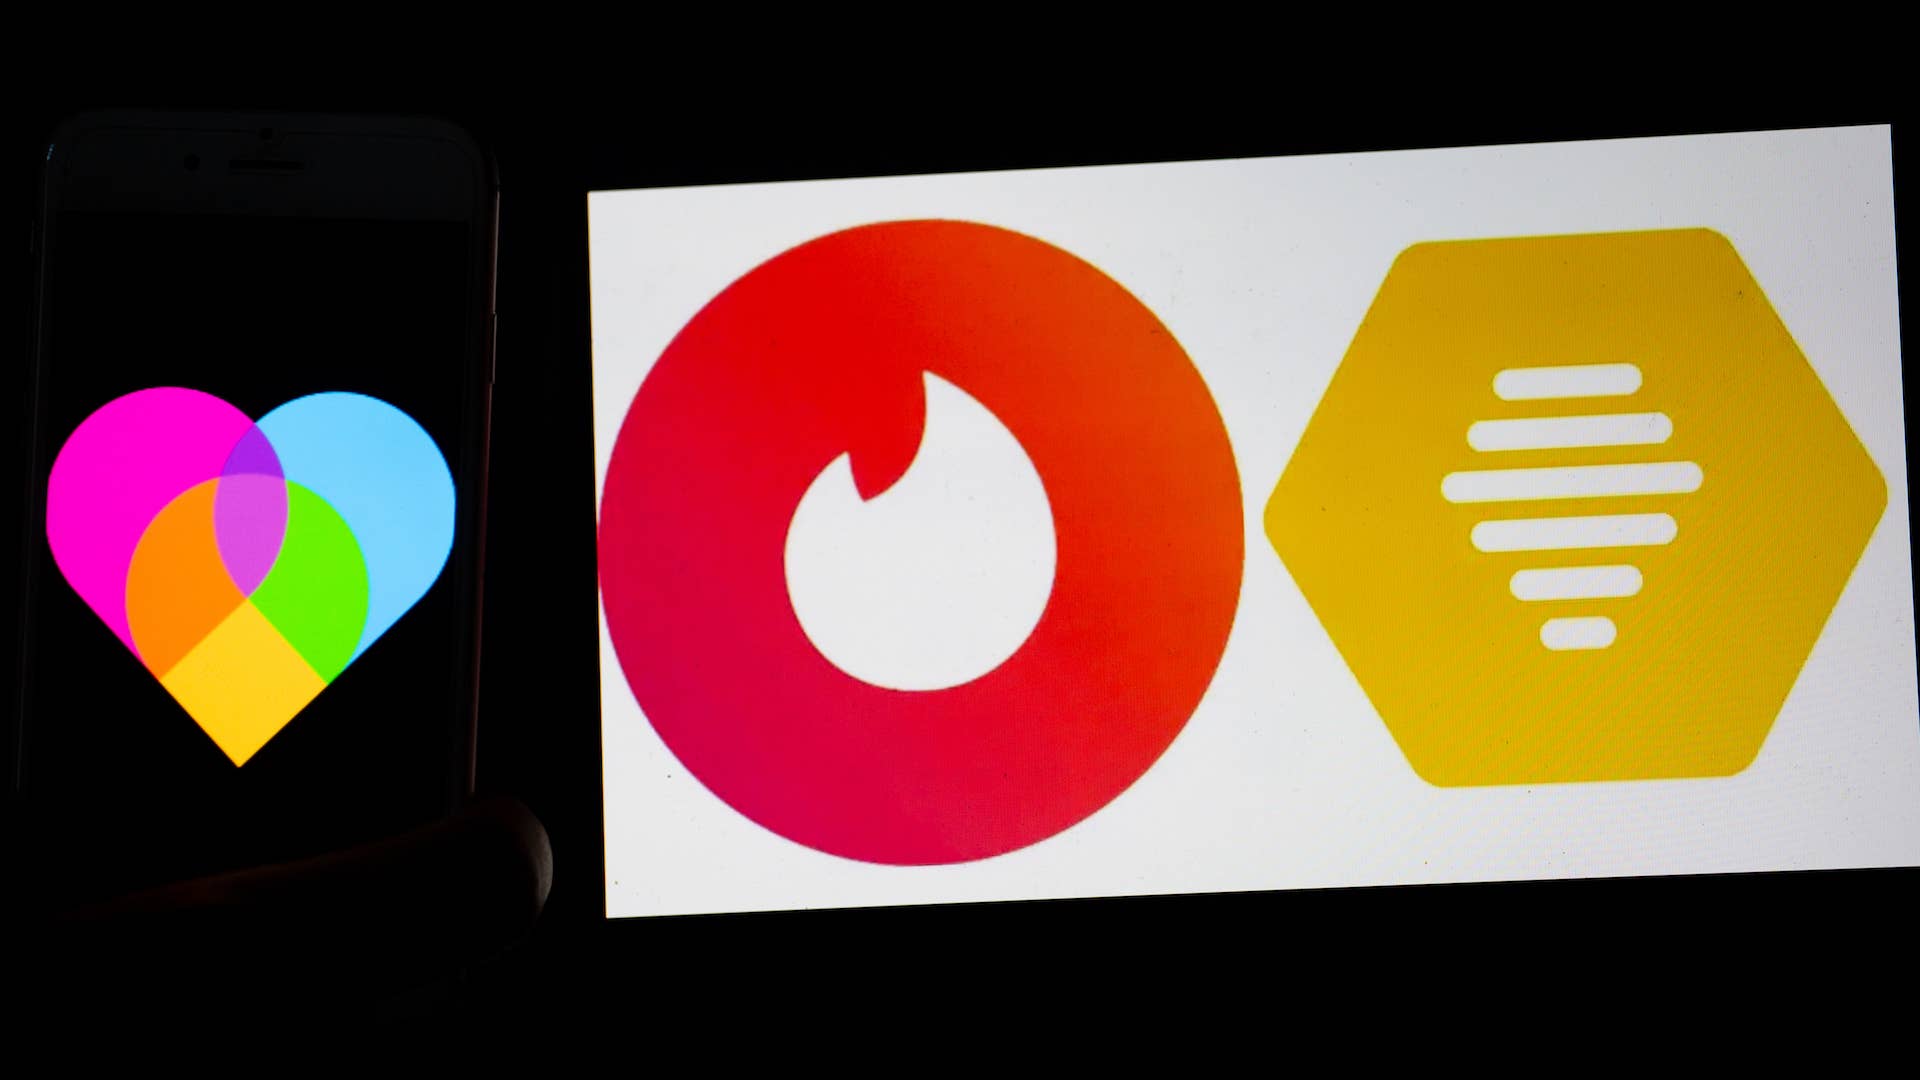 The logos of dating apps Lovoo, Tinder and bumble are seen on a mobile and laptop screen.